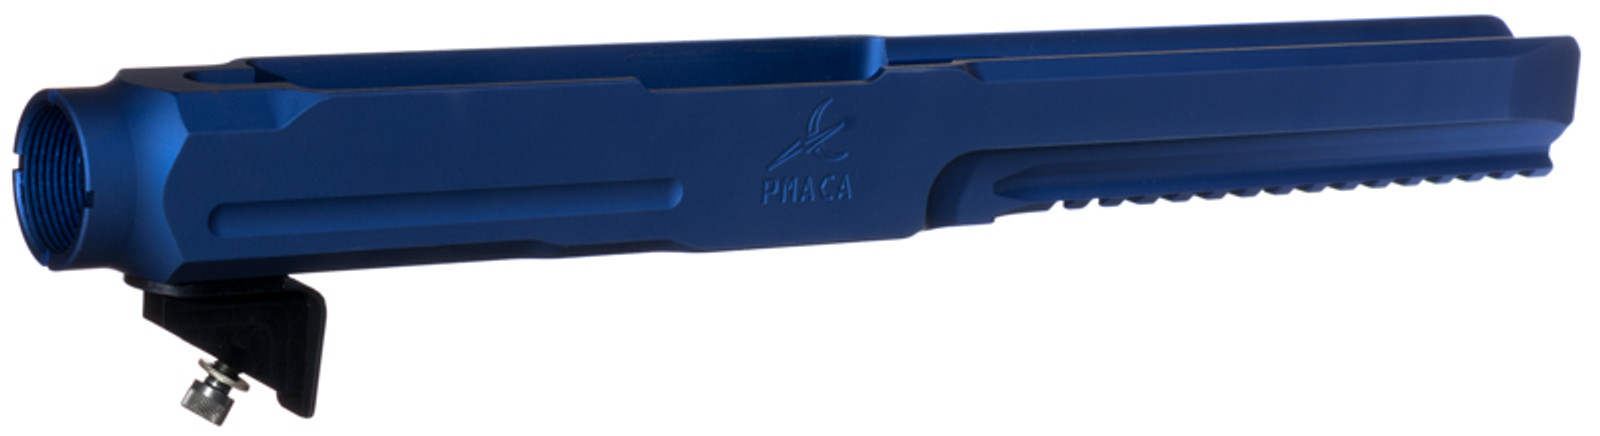 PMACA Blue Anodize Long Nose Chassis - Upgrade your Ruger 10/22